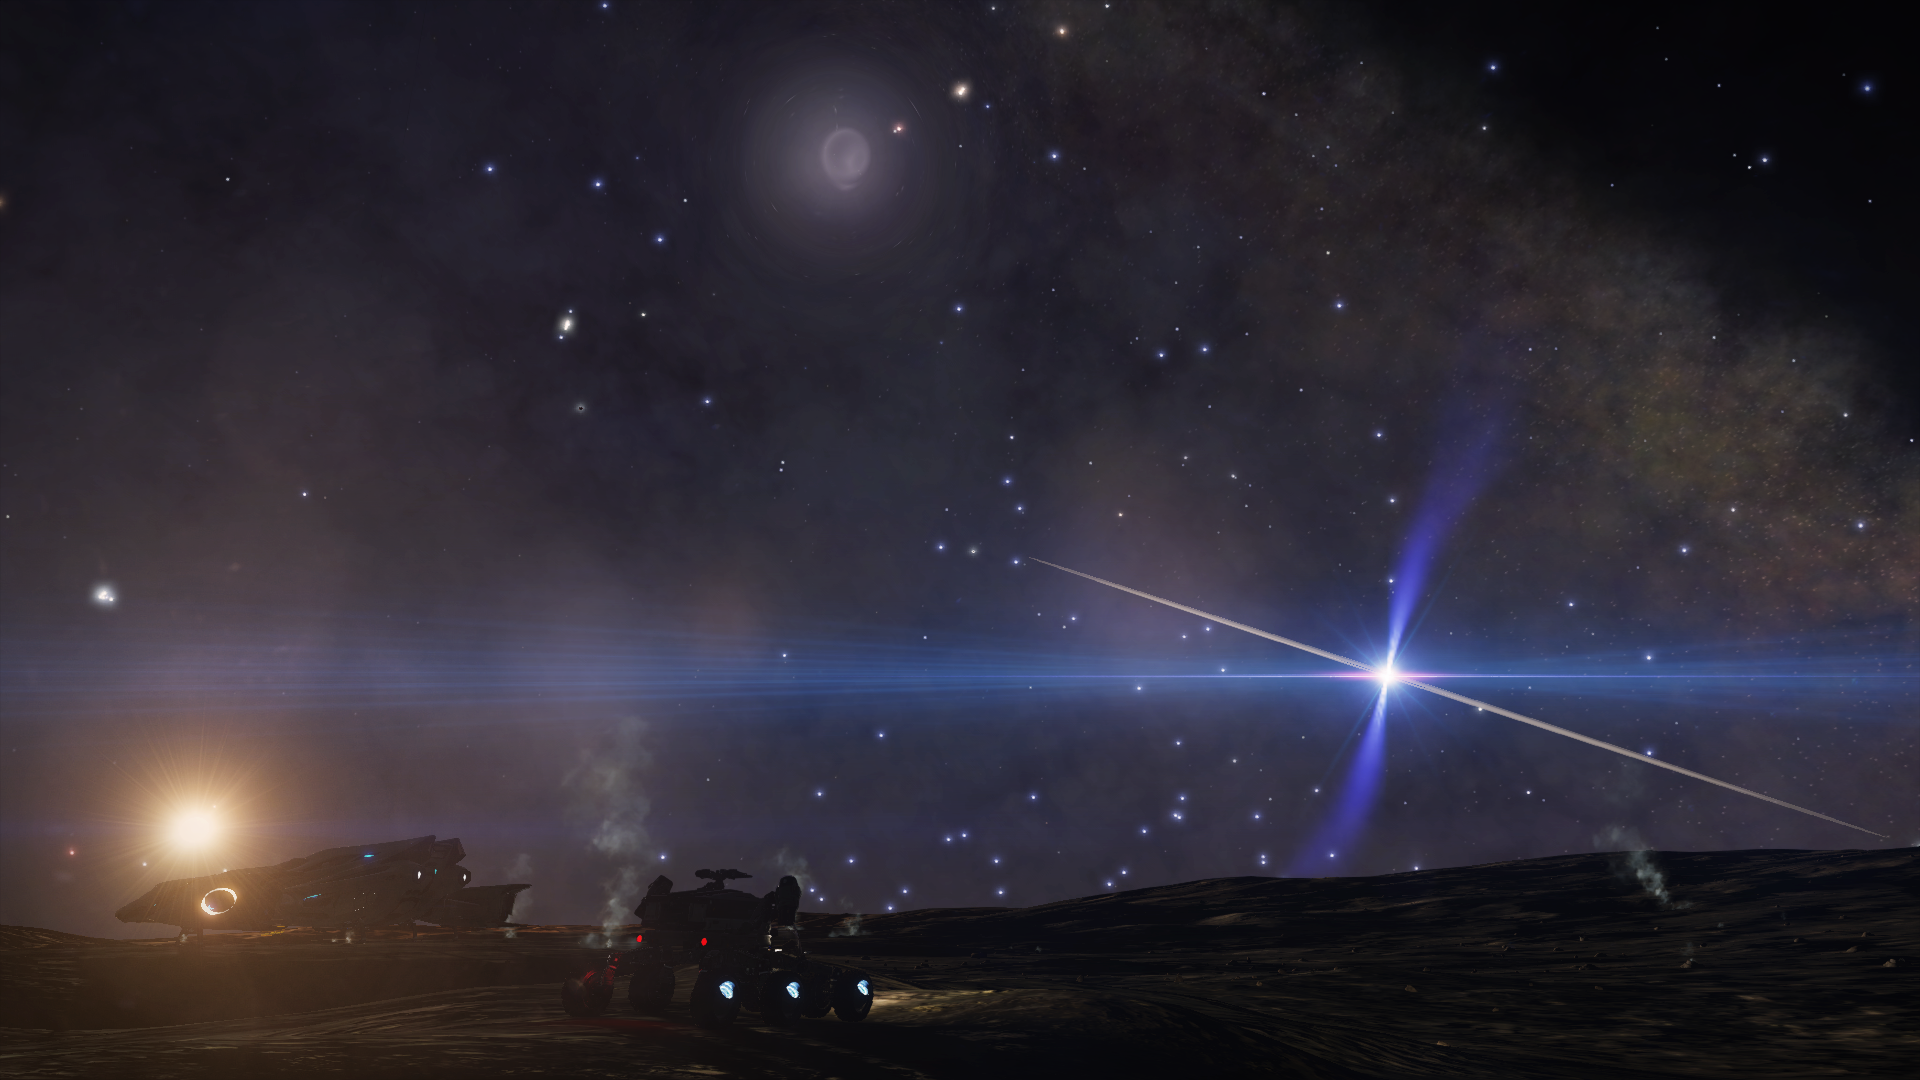 Ringed White Dwarf seen from one of the few landable moons